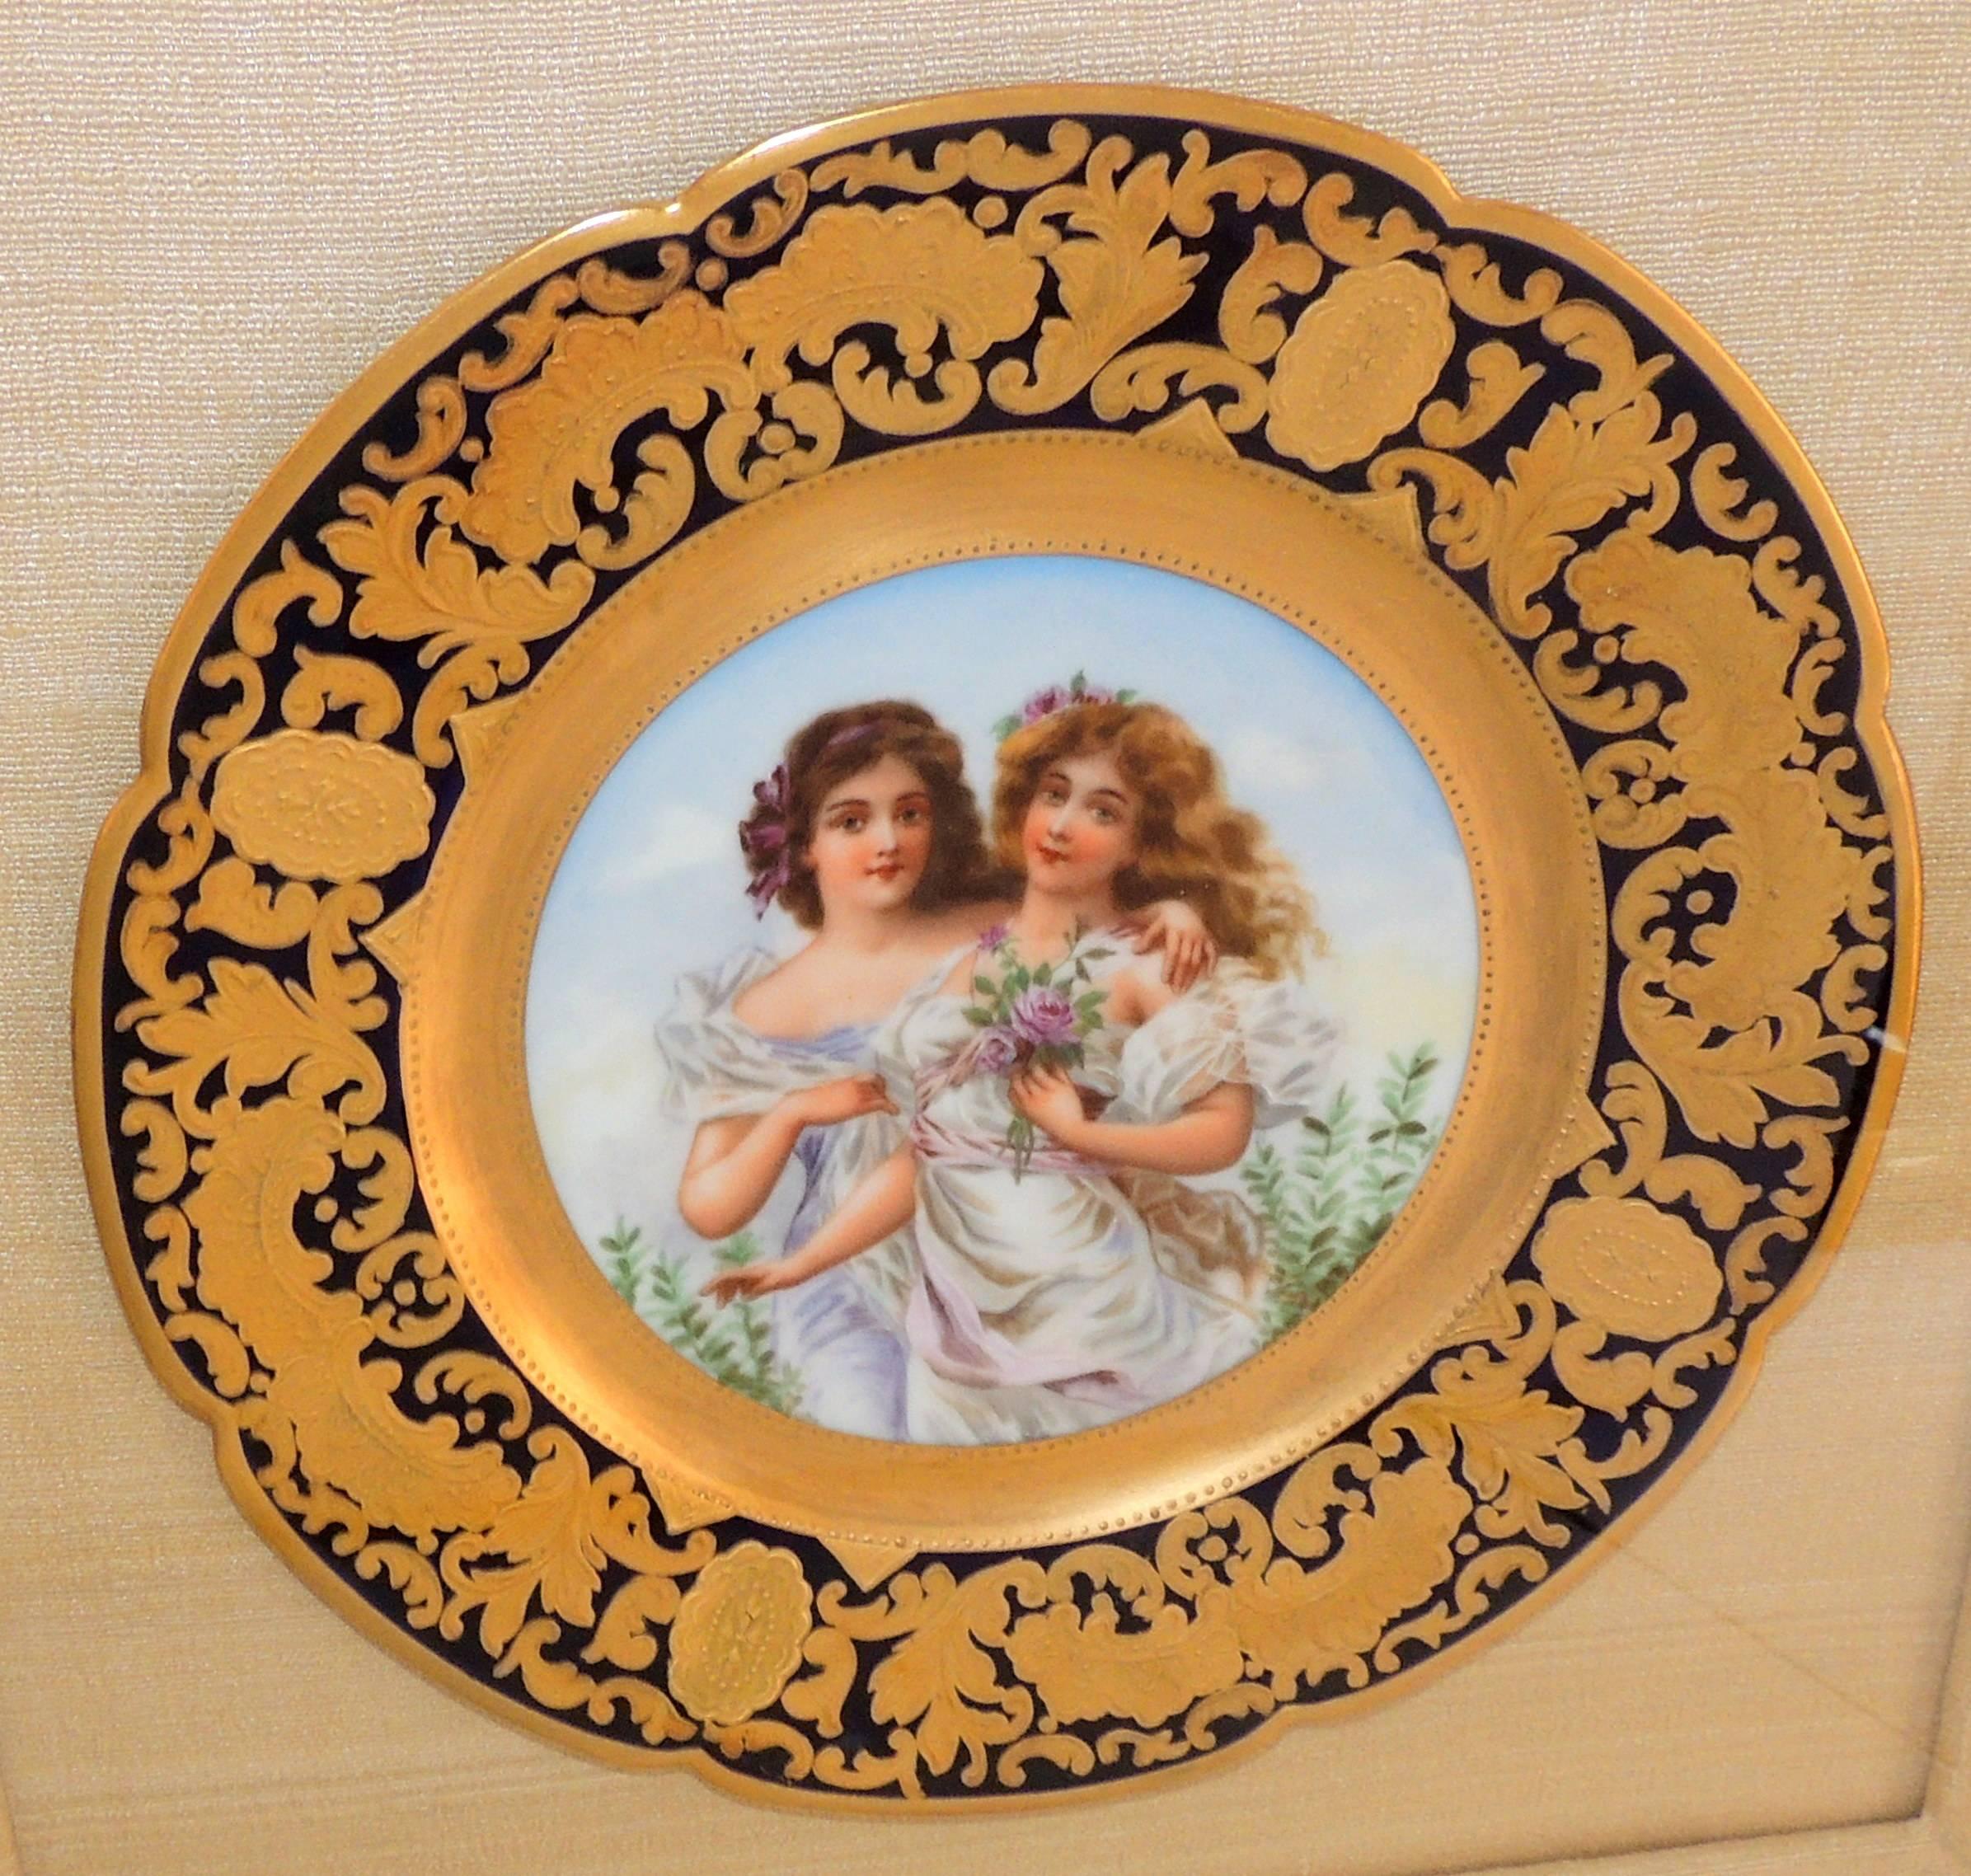 A fine French hand-painted portrait plate of two female maidens embarrassing and holding flowers
by Jules Etienne Rue De Paradis France 1898 beautifully framed in a gold gilt shadow box frame with beige backdrop.
Measures:
Shadow box 18